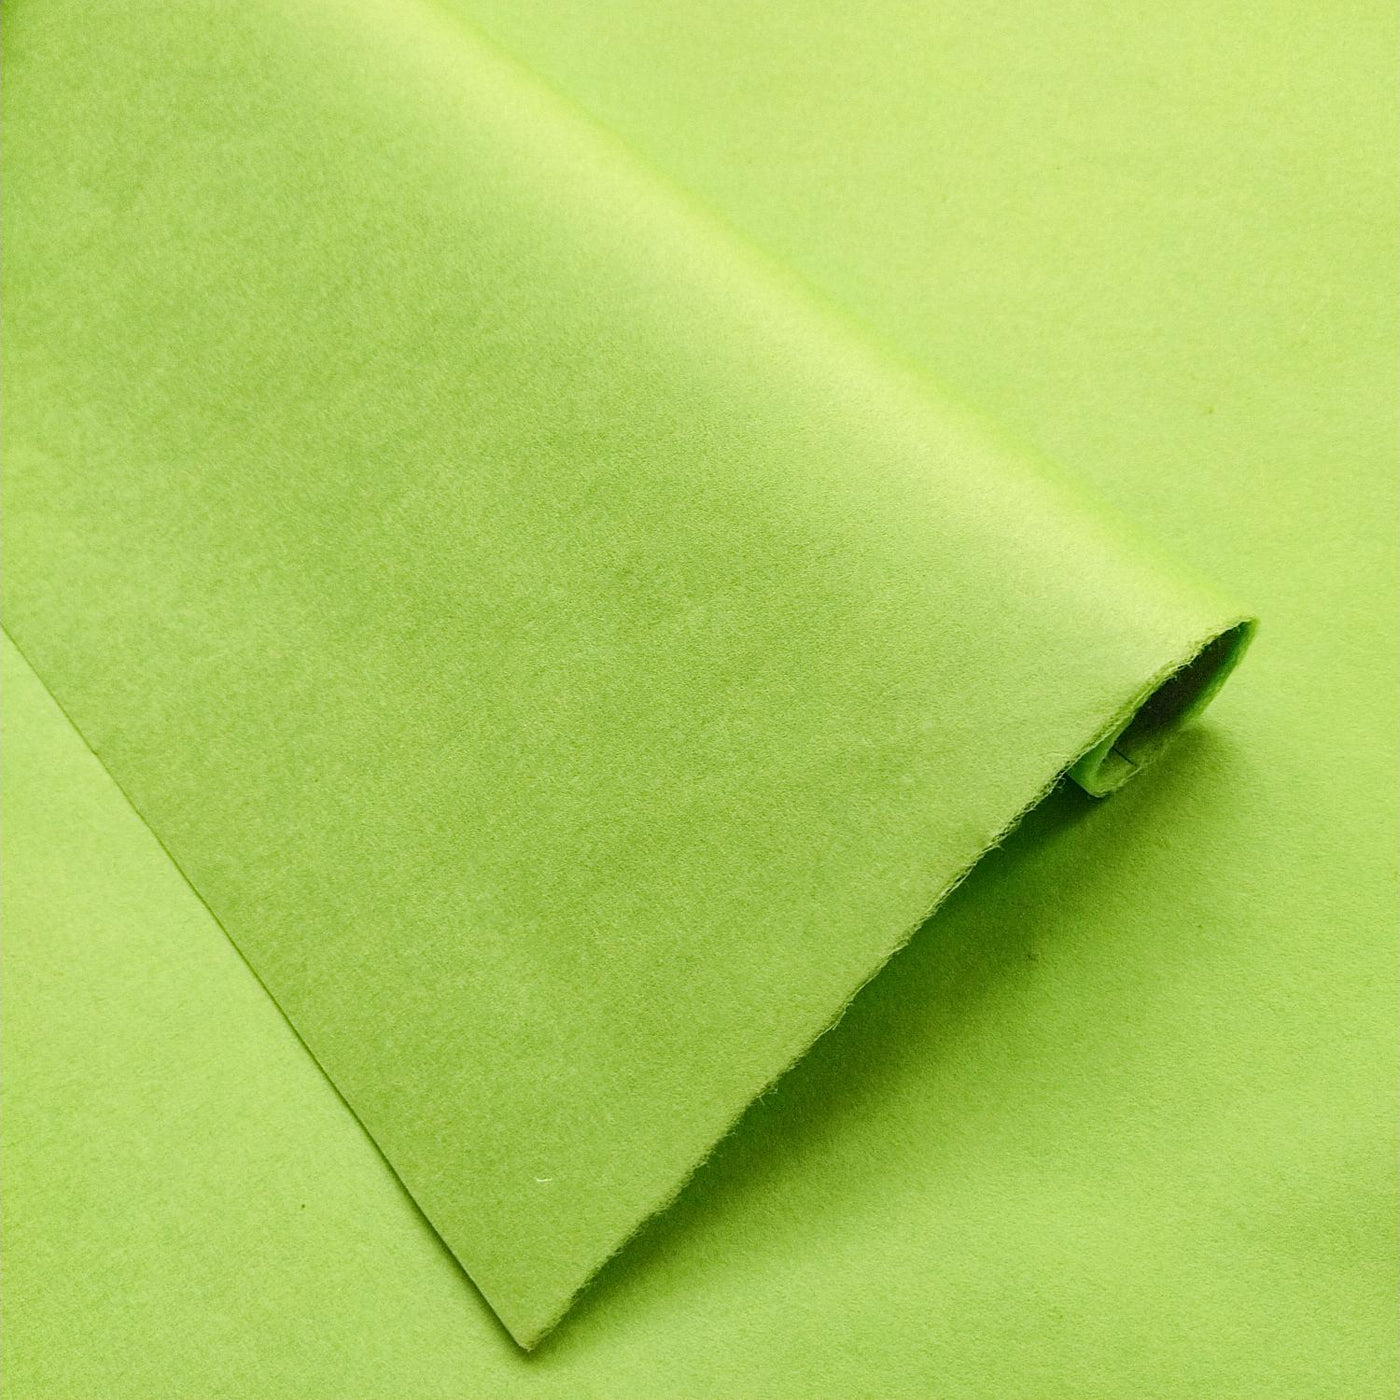 Solid-Colored Kozo Mulberry Paper (Olive Green)